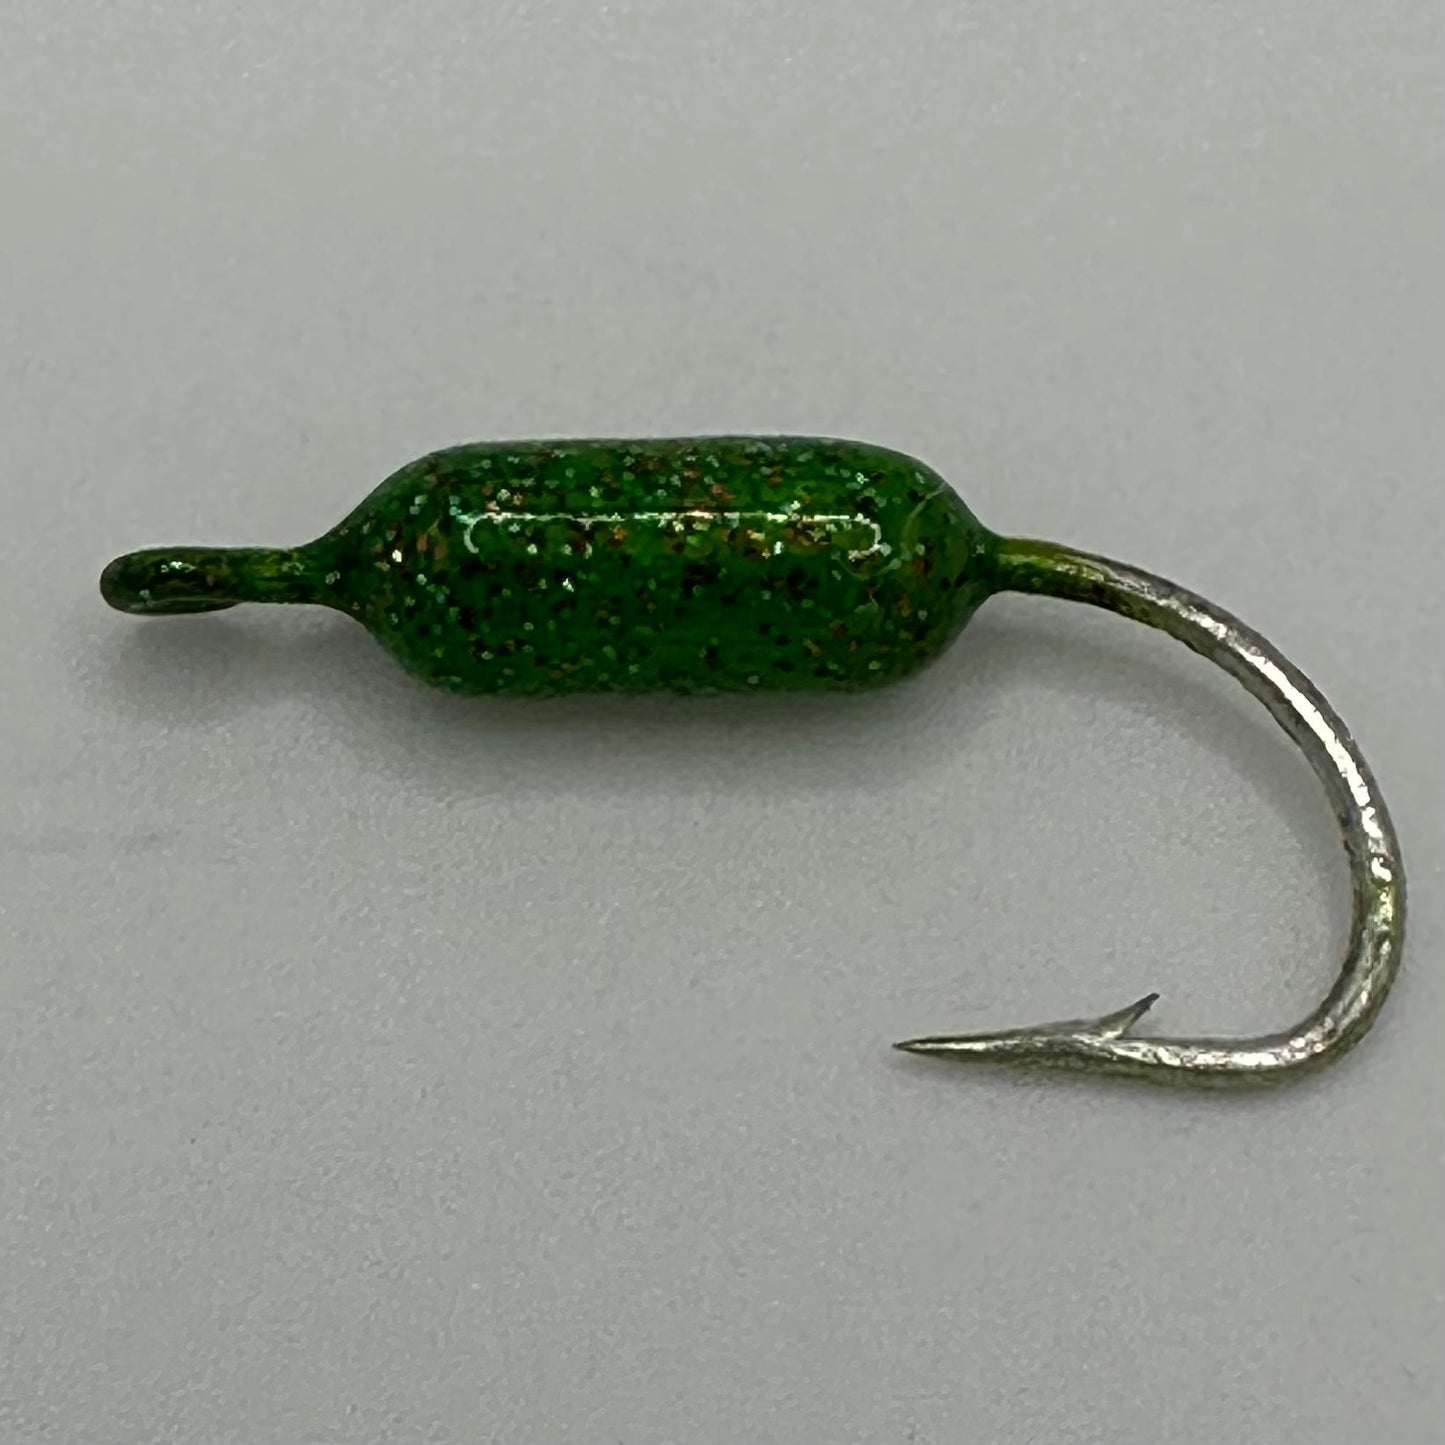 YELLOWTAIL SNAPPER JIG WITH 2/0 CIRCLE HOOKS 10PK available in every color